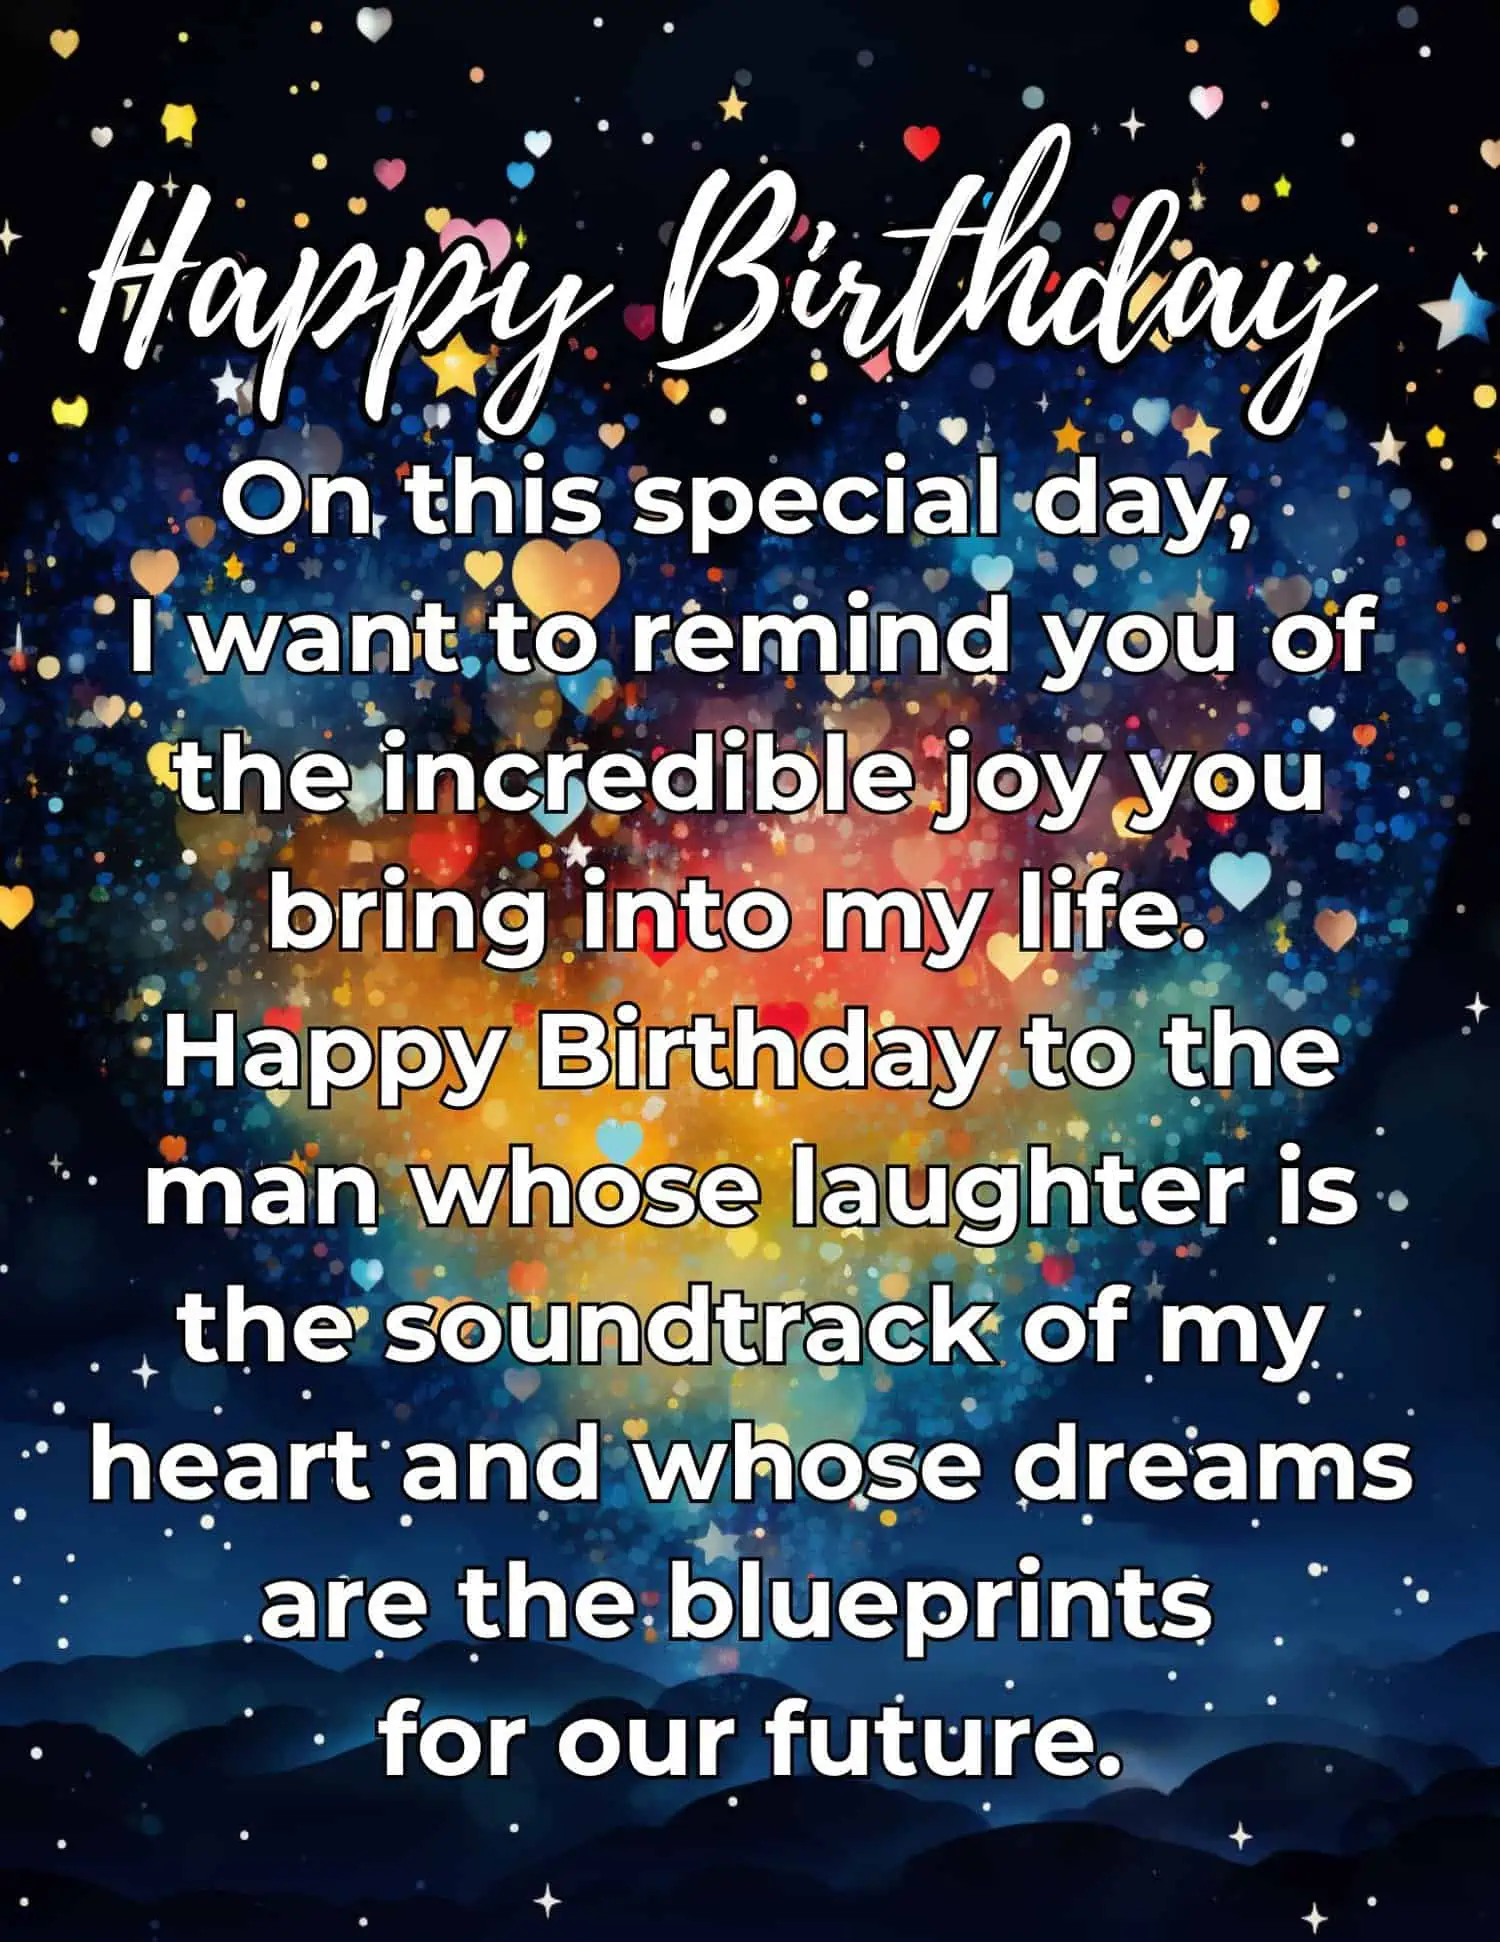 250+ Best Birthday Wishes for Your Boyfriend (to Copy Paste)